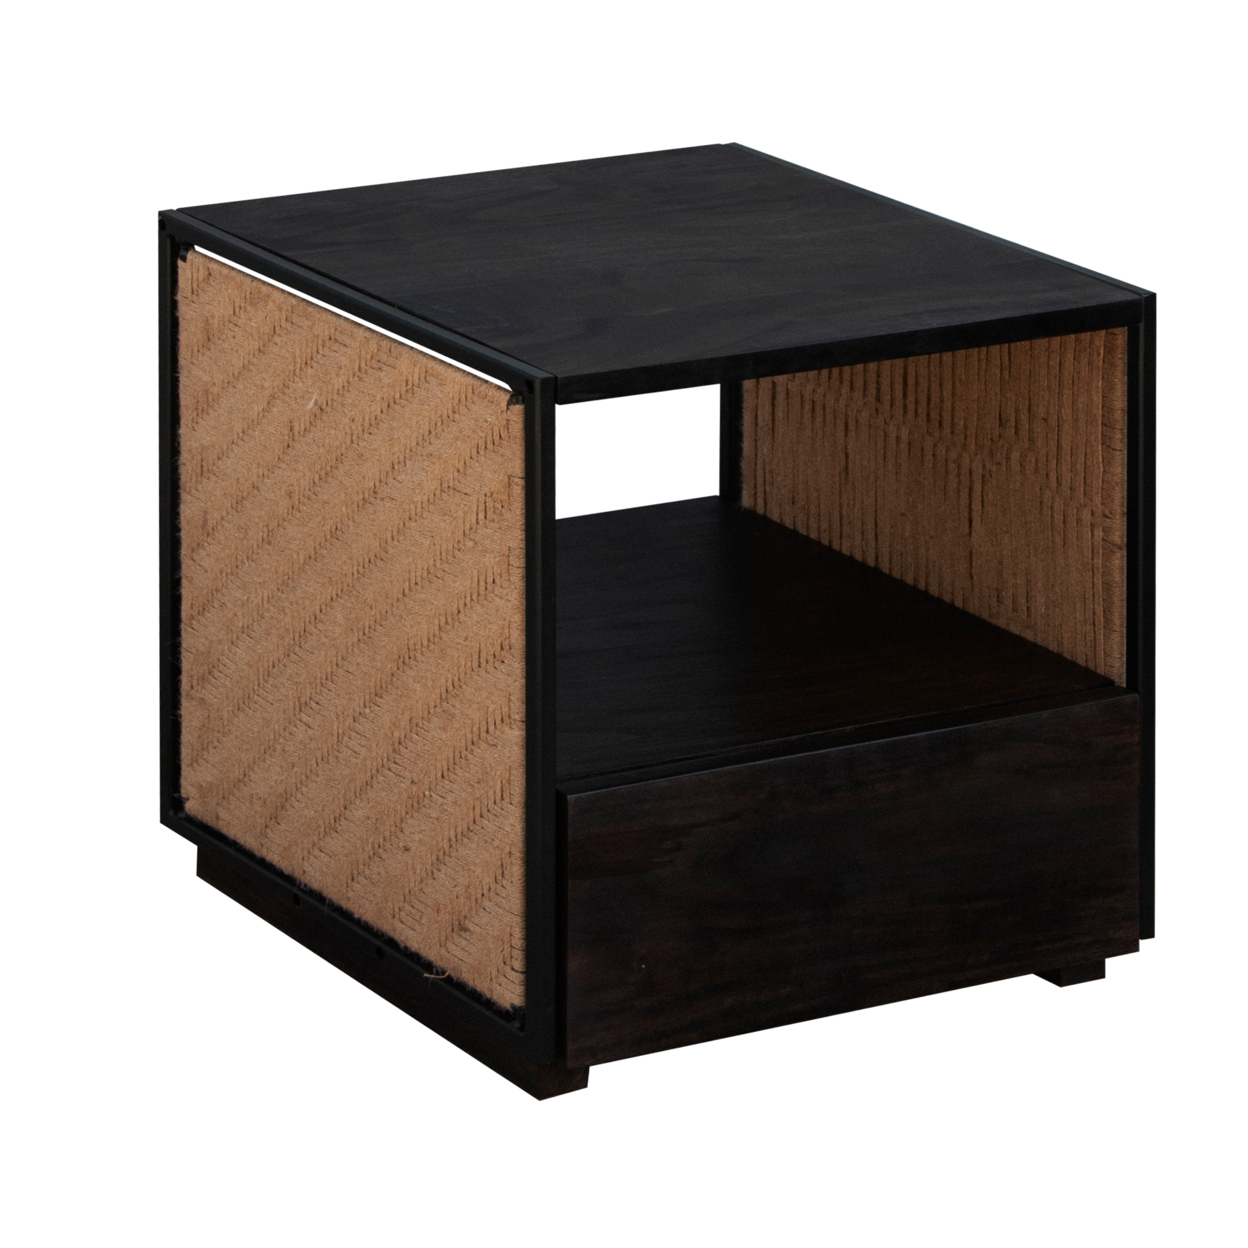 21 Inch Handcrafted Acacia Wood Side Table Nightstand, Woven Jute Side Panels, Brown, Black- Saltoro Sherpi